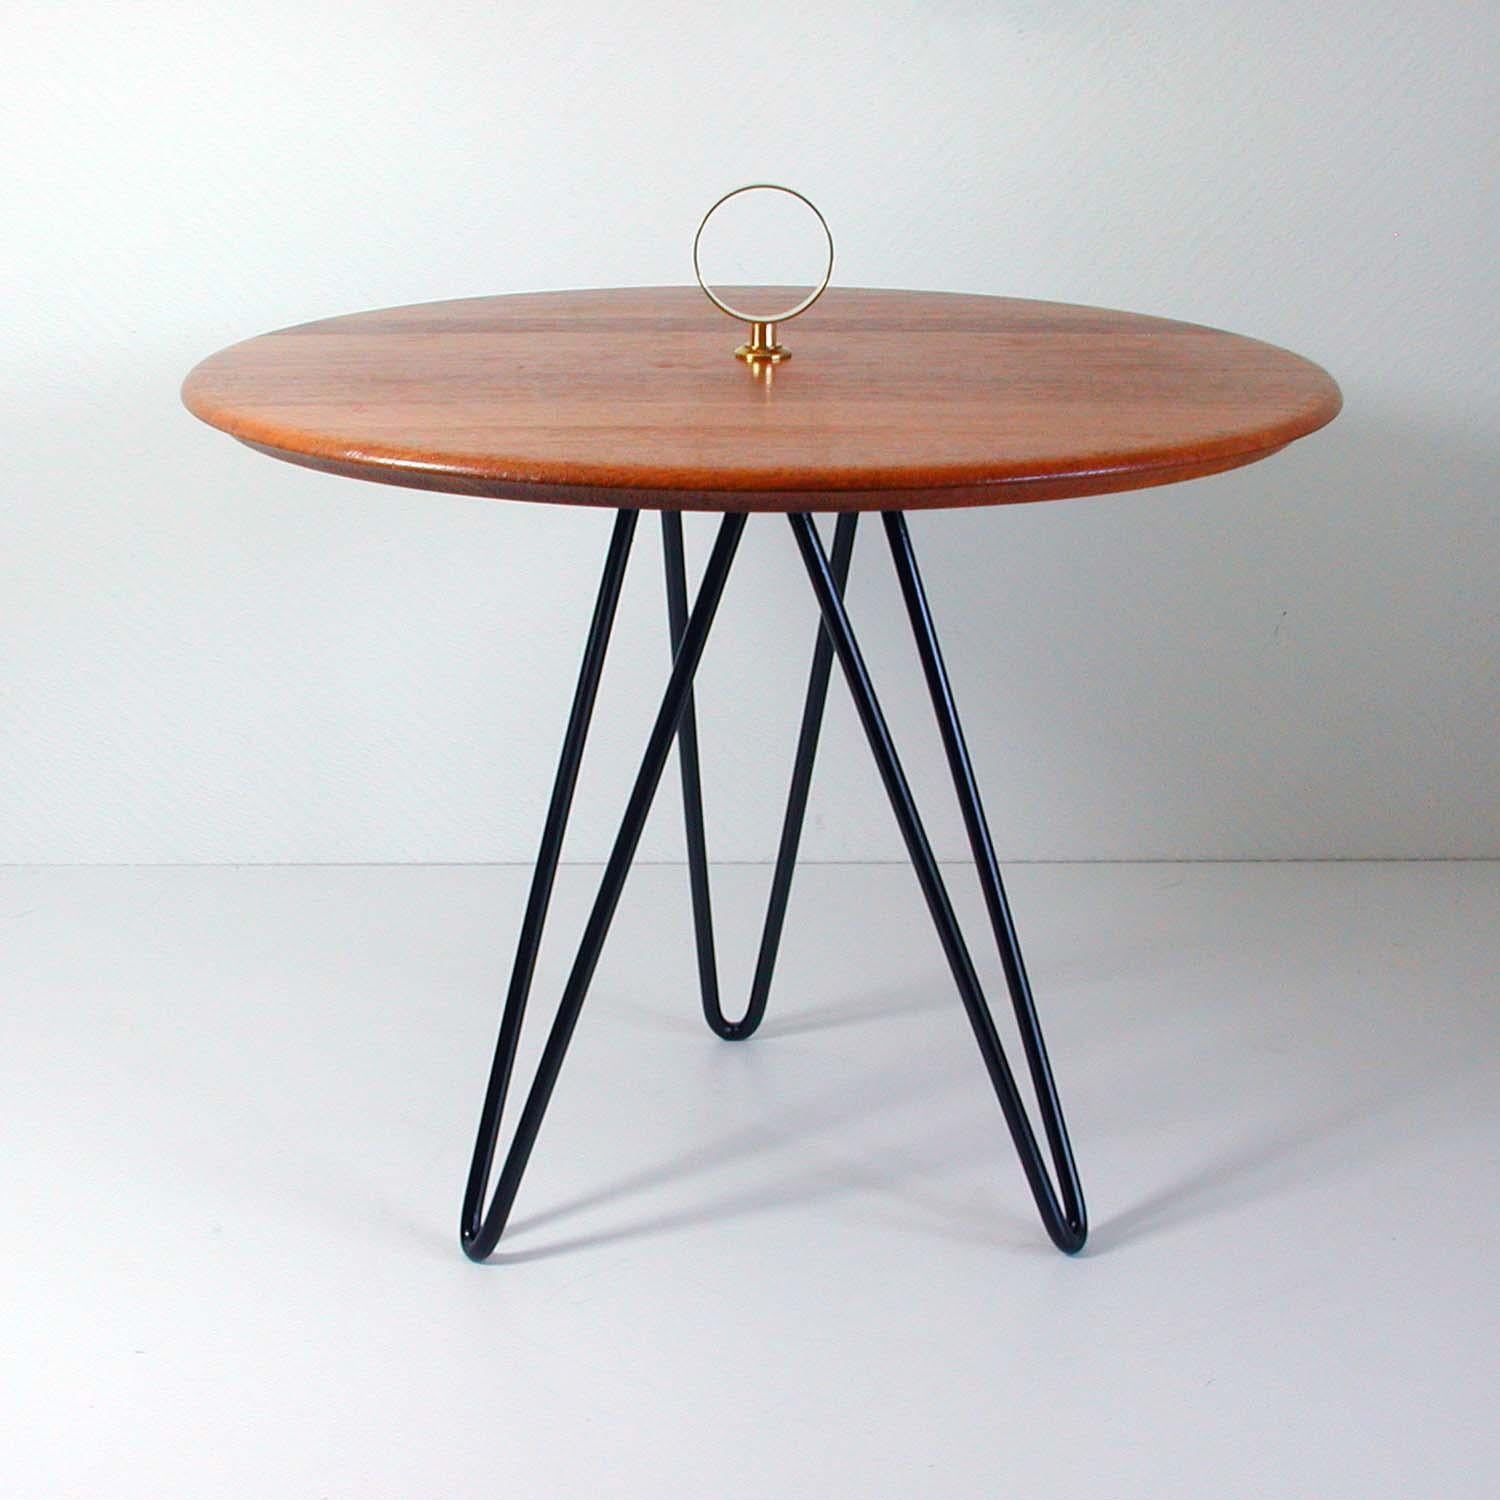 This round vintage tripod side table was made in Denmark in the 1950s to 1960s by Digsmed. It has a black lacquered cast iron string style base, a teak table top and brass details.